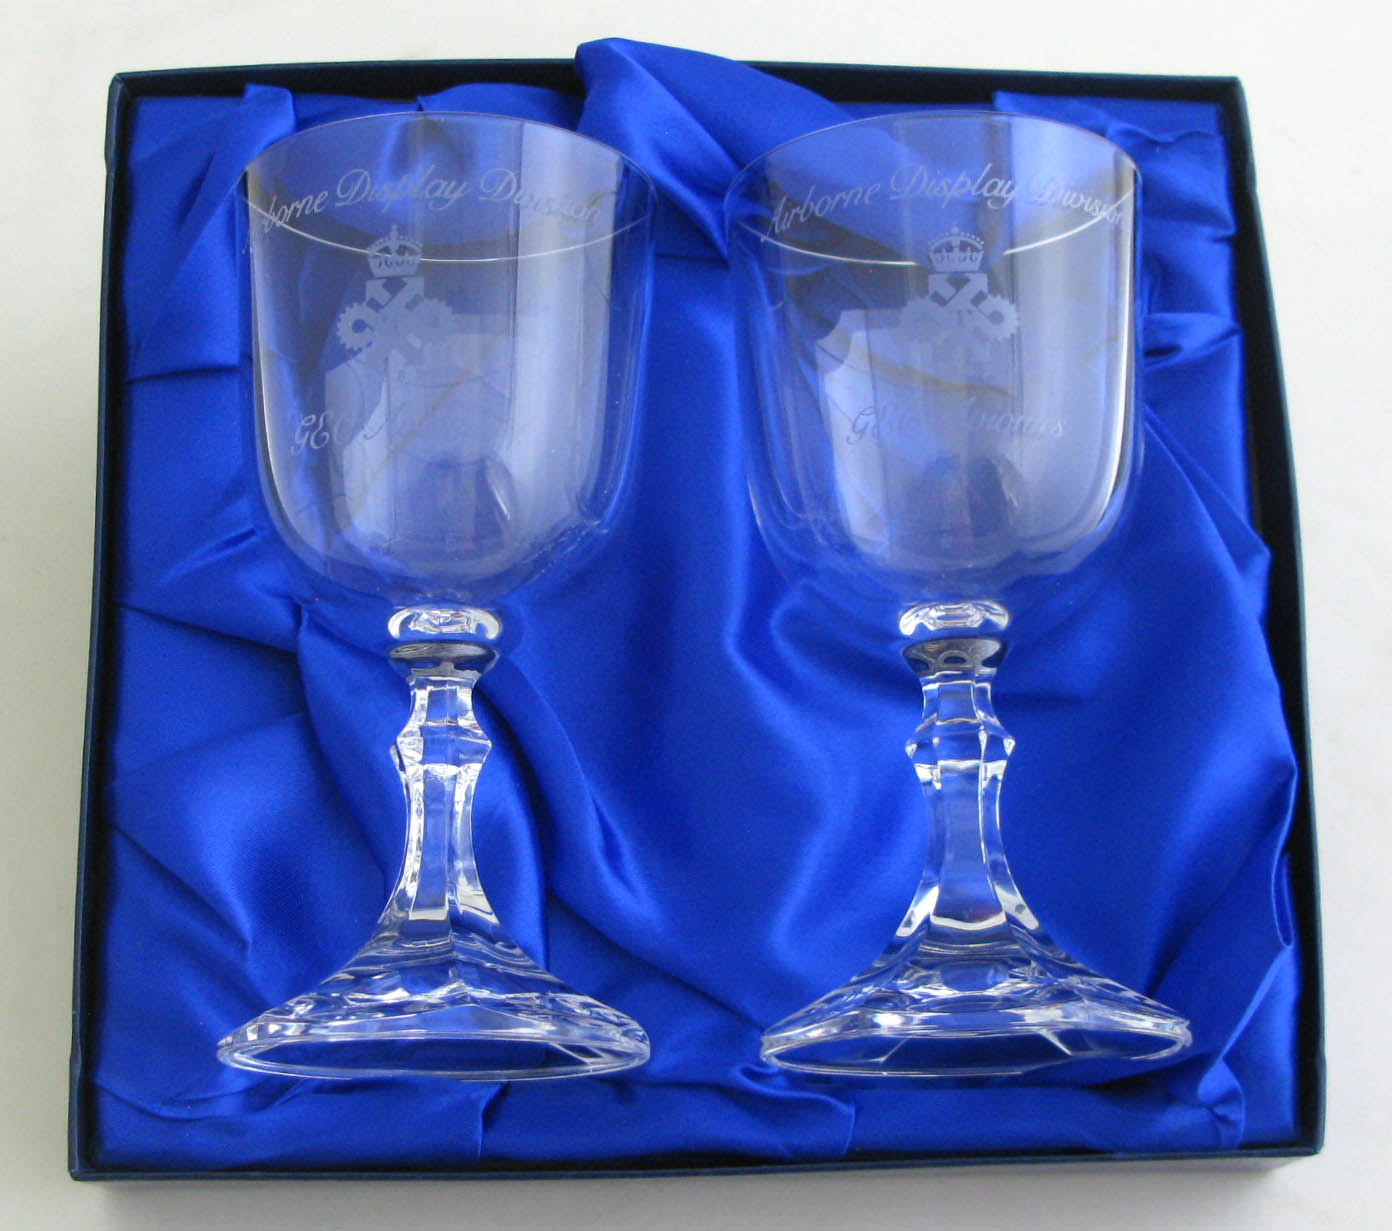 Queen's Award Crystal Glasses